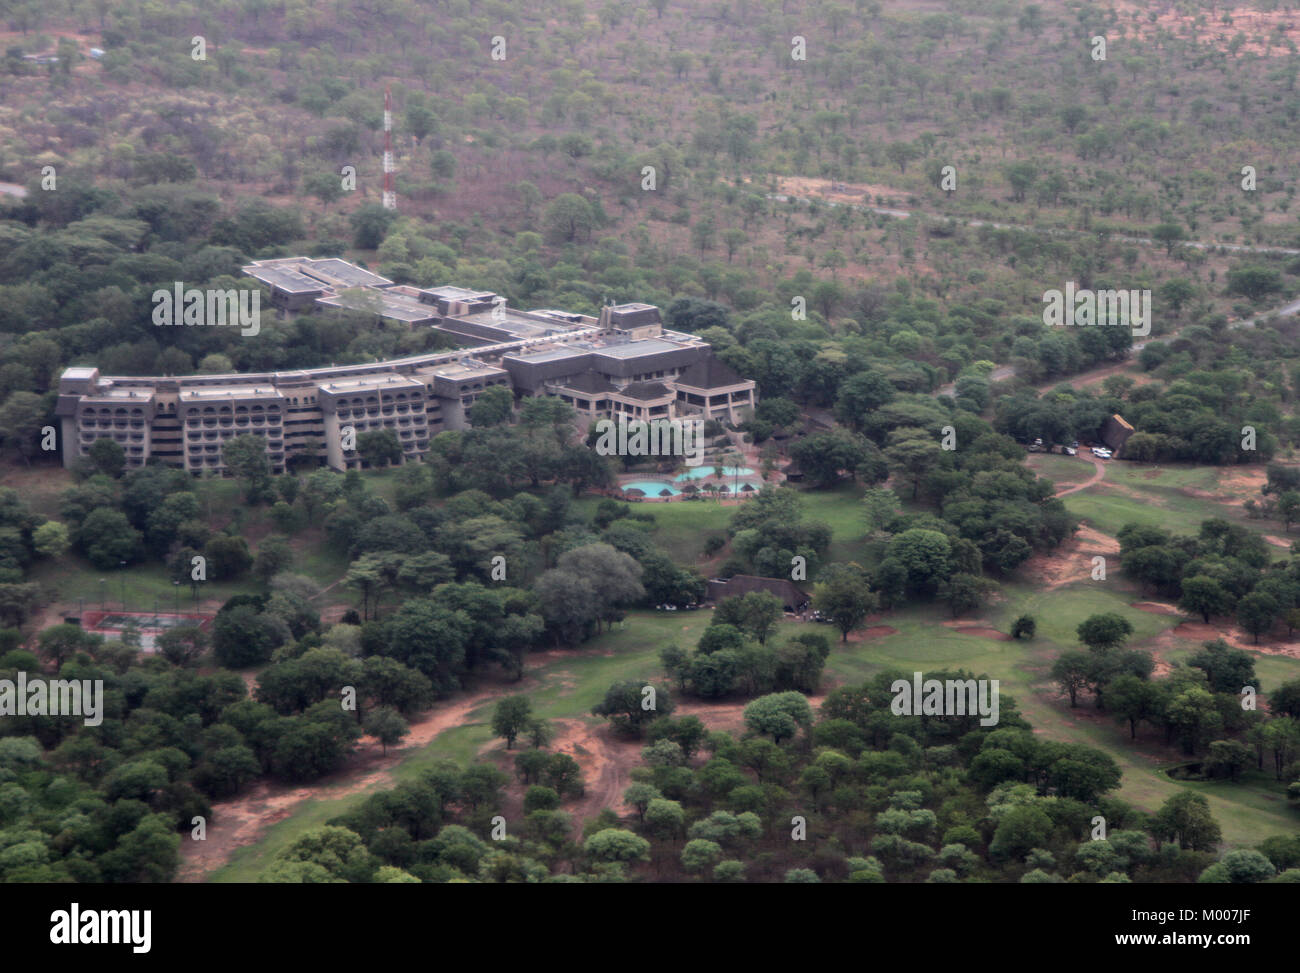 Elephant Hills Intercontinental Hotel surrounded by forest, Victoria Falls, Zimbabwe. Stock Photo